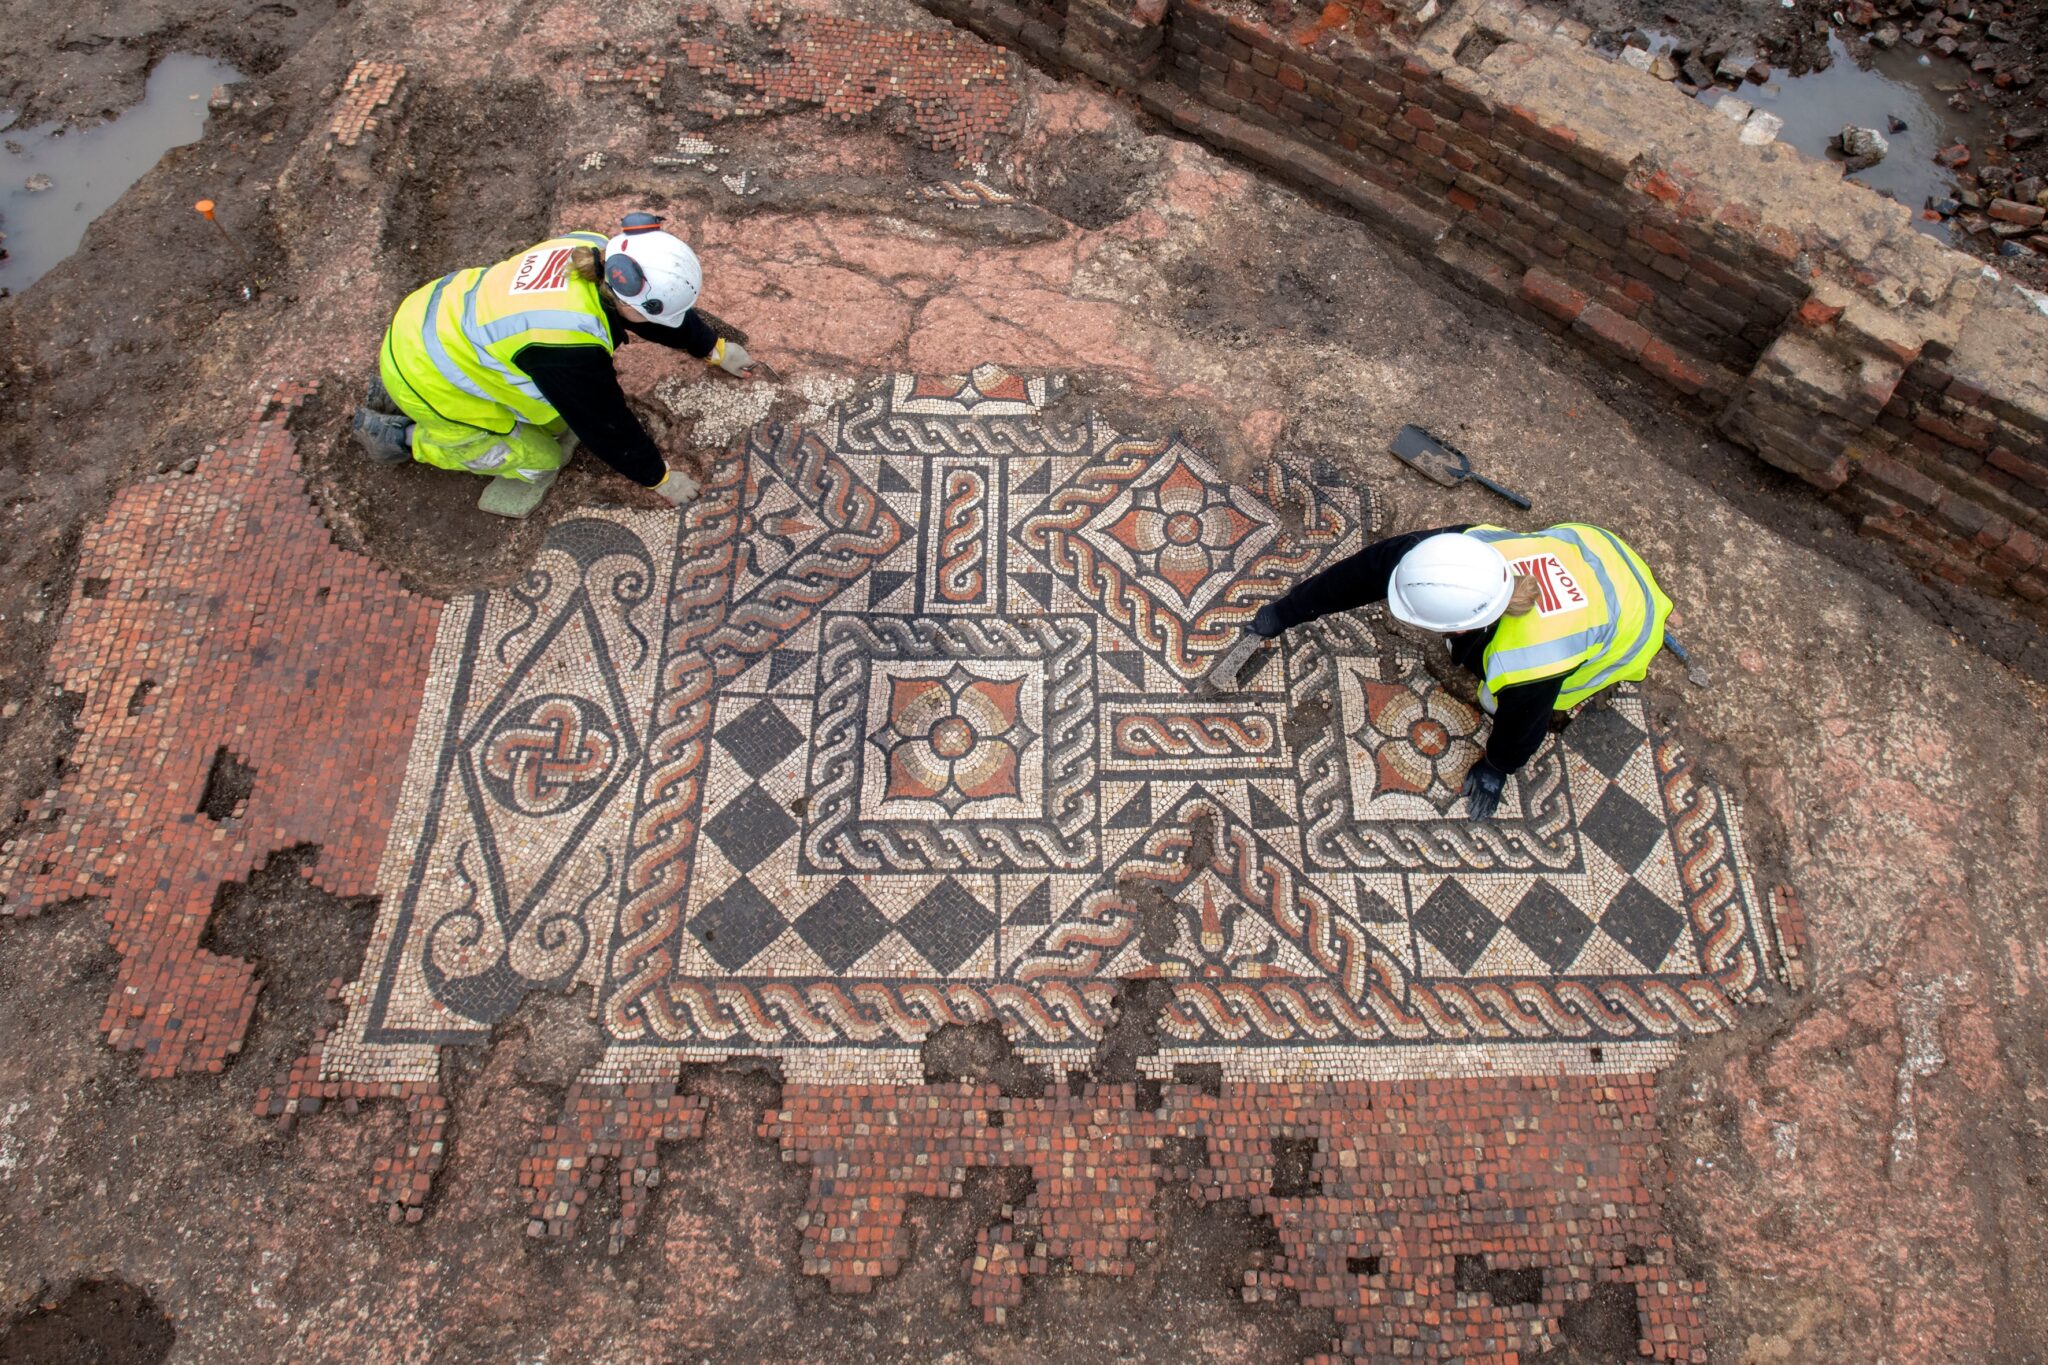 Roman mosaic is largest found in London in 50 years